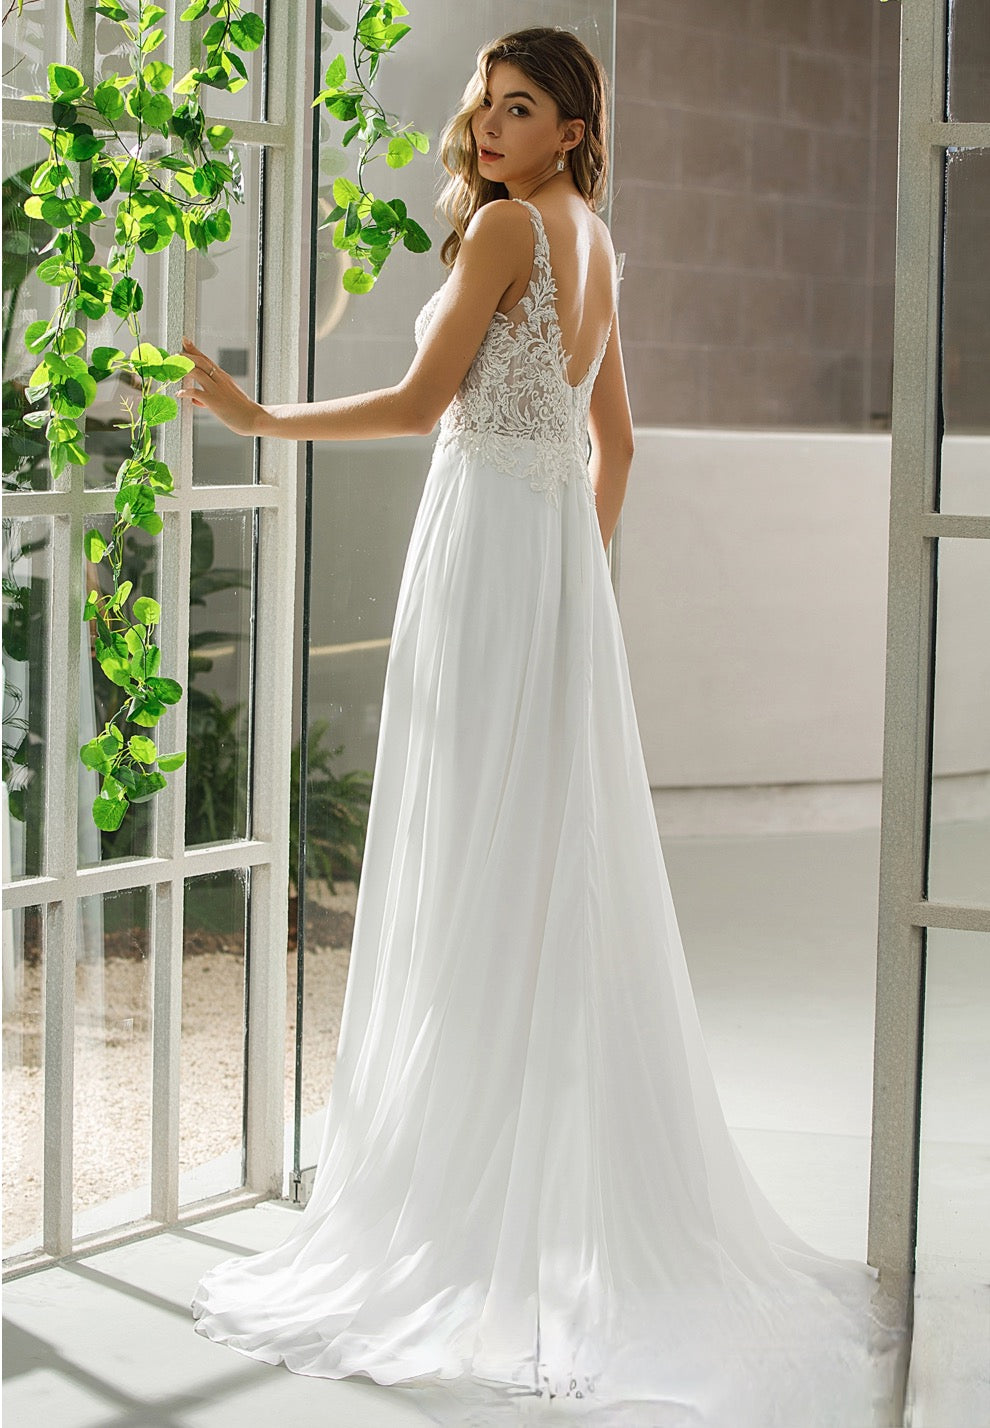 Simple Lace A-line Bridal Gown With Chiffon Skirt – TulleLux Bridal ...